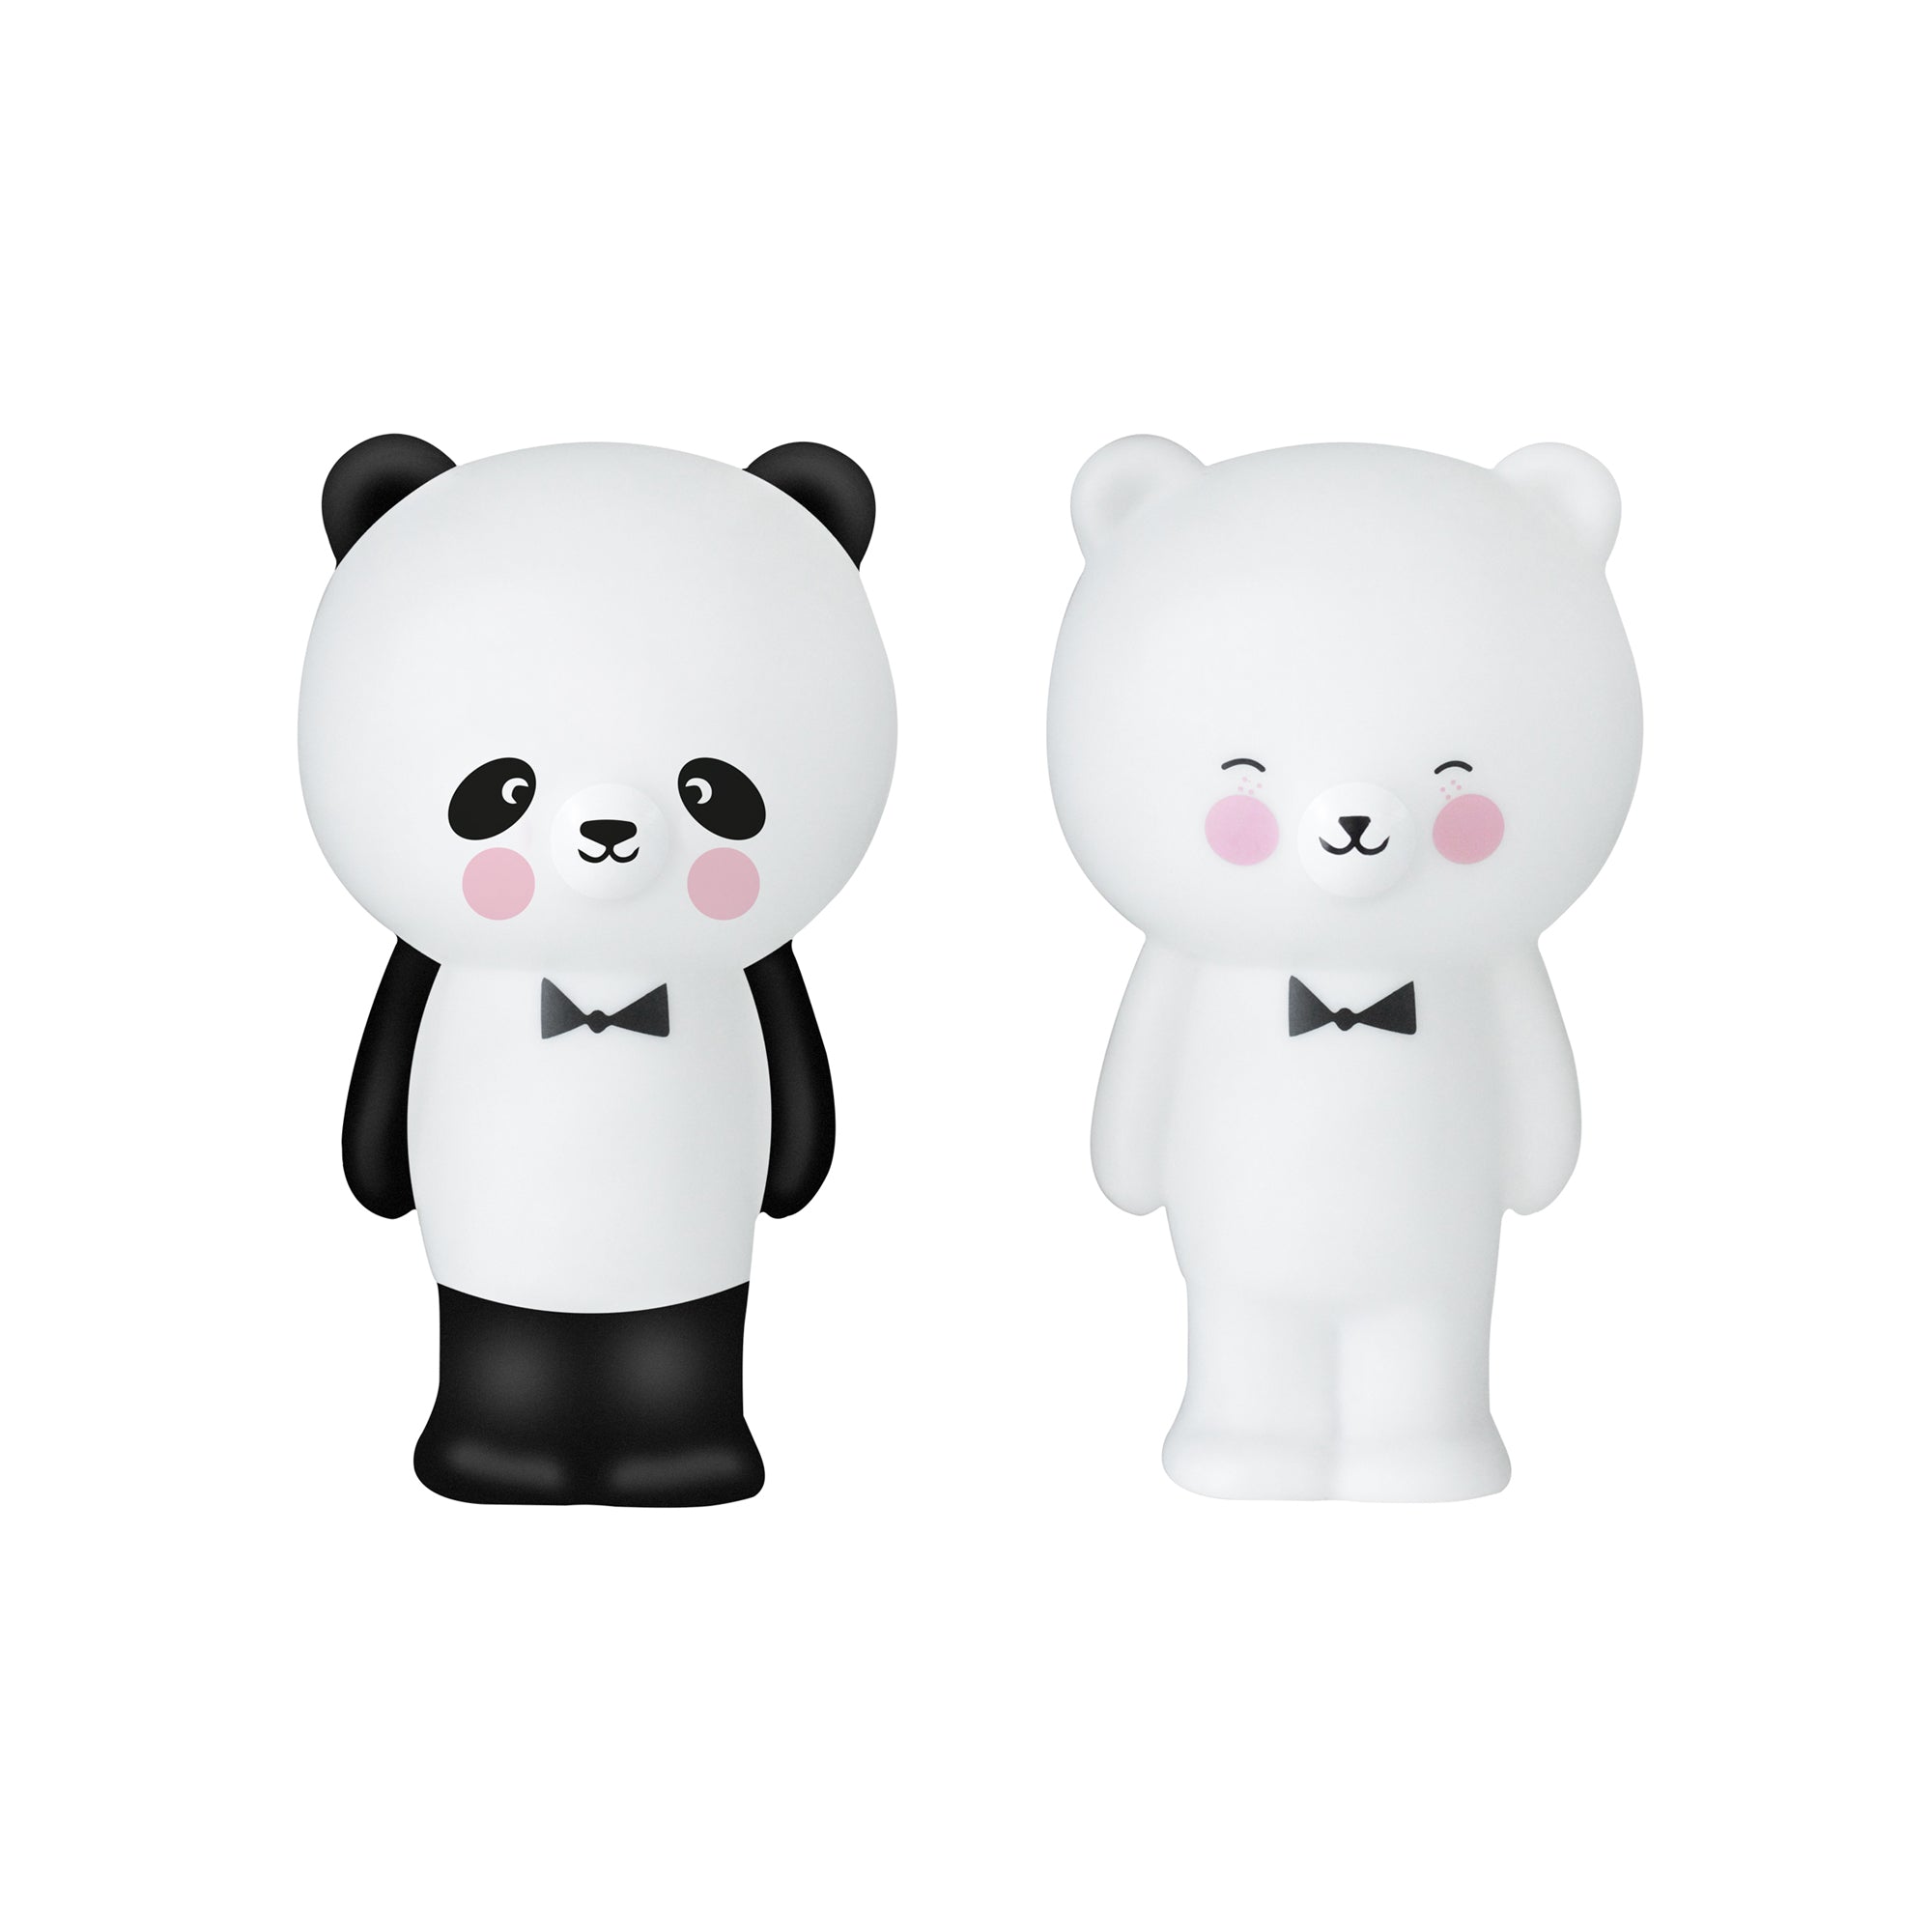 Little Panda and Little Polar Bear Lights by Eef Lillemor, available at Bobby Rabbit.